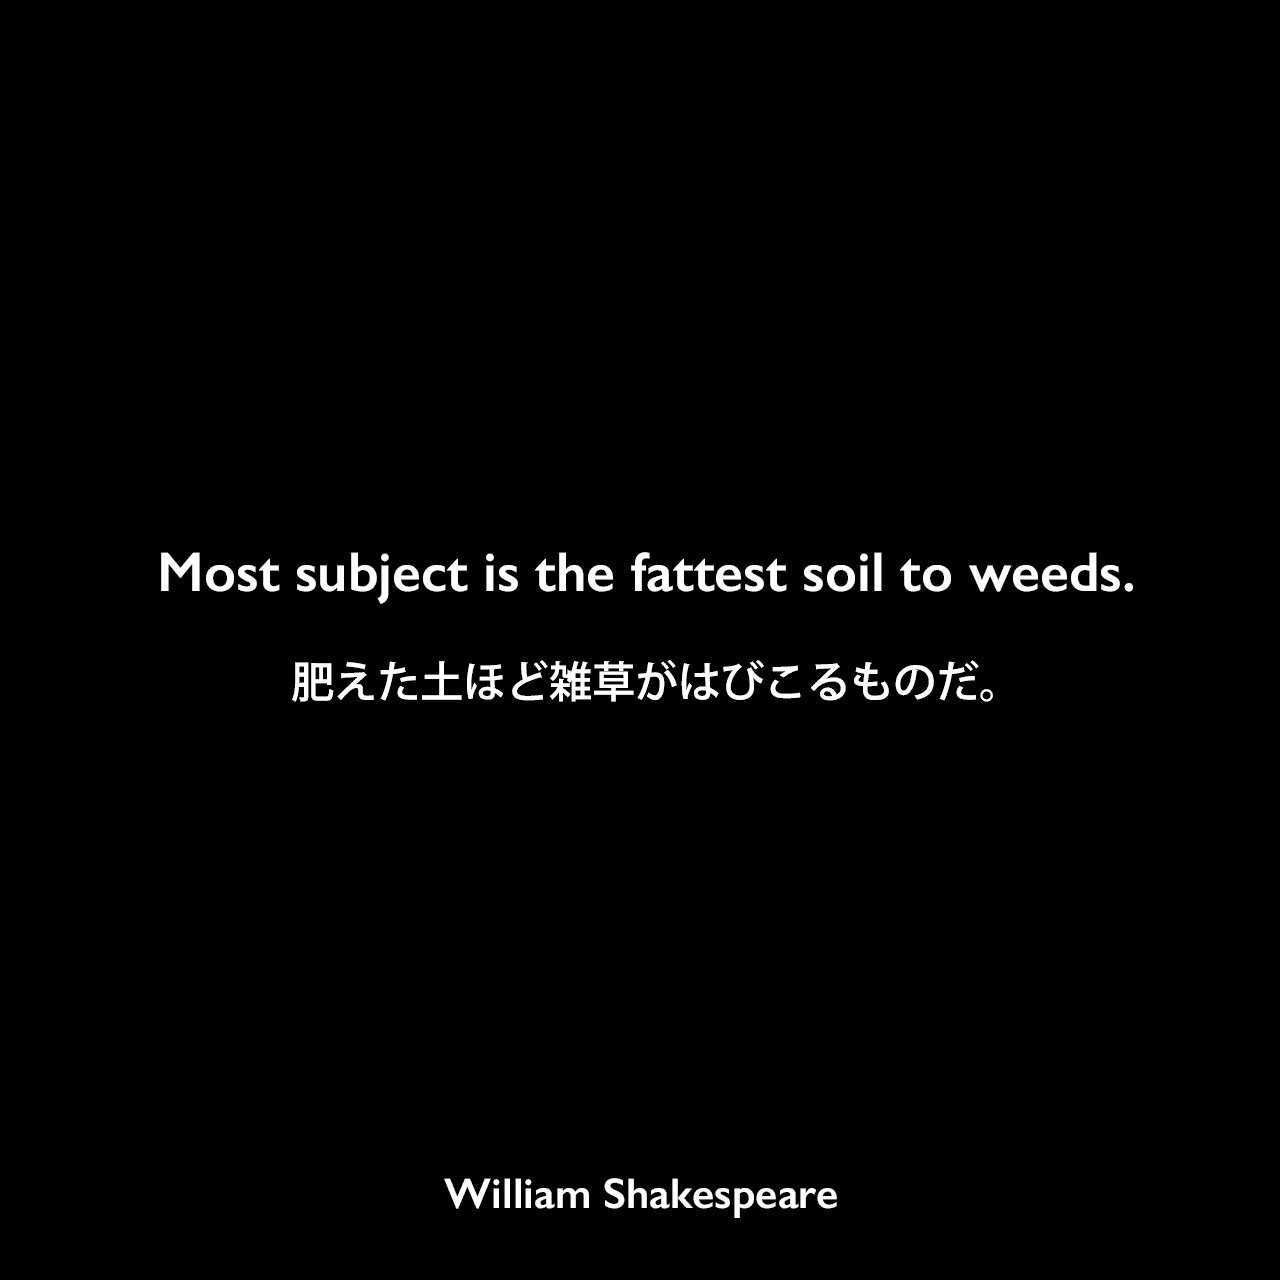 Most subject is the fattest soil to weeds.肥えた土ほど雑草がはびこるものだ。William Shakespeare